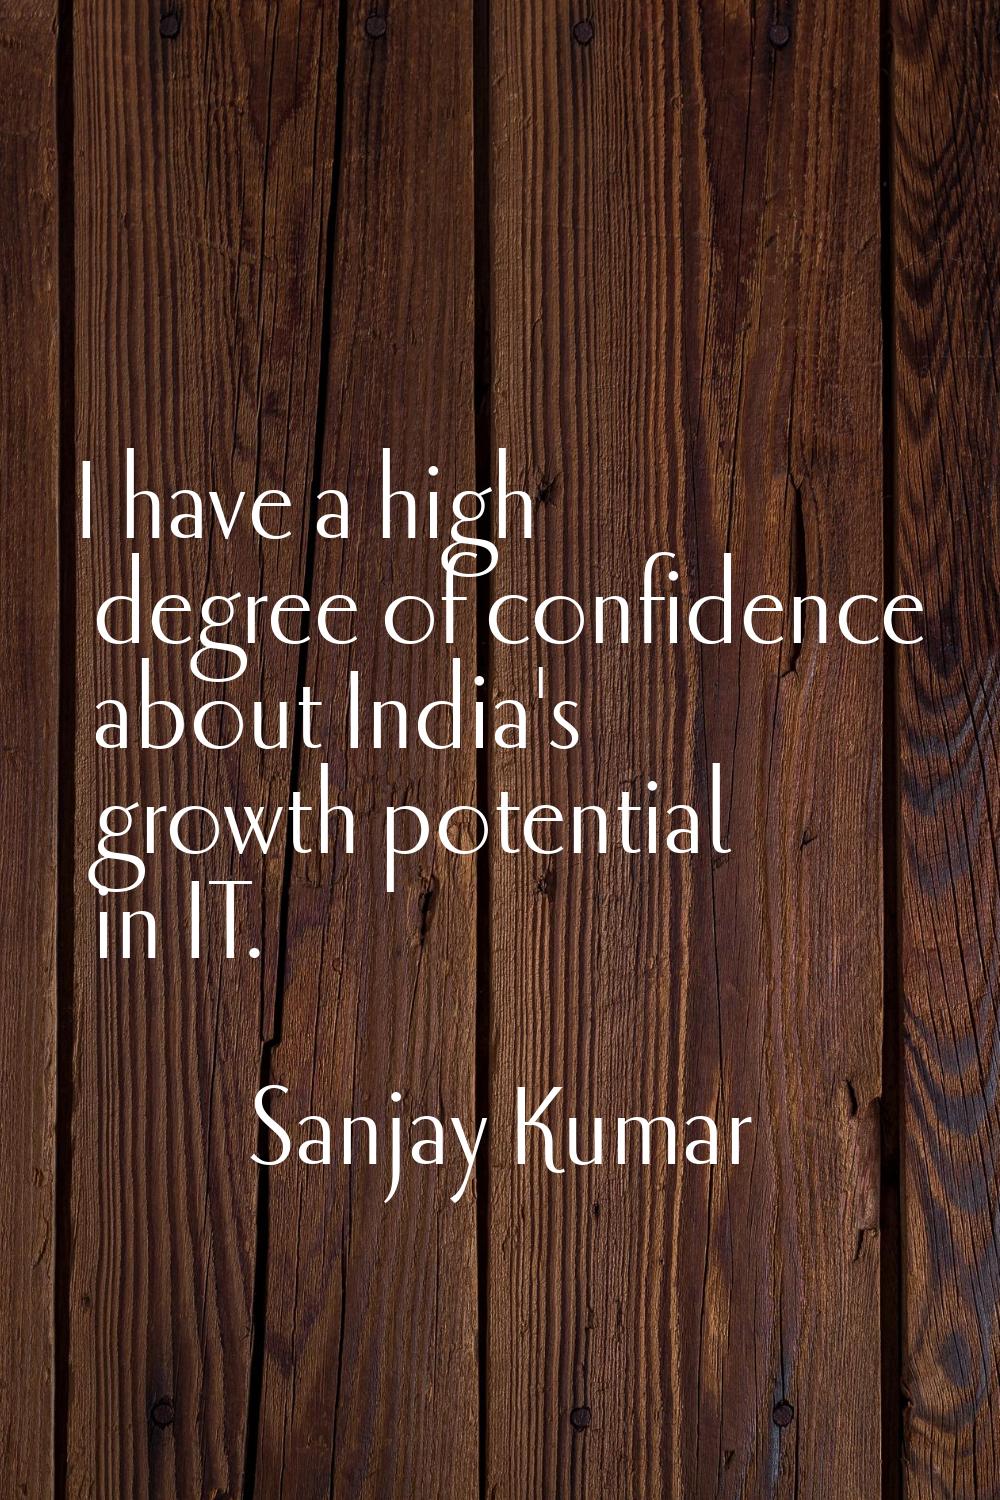 I have a high degree of confidence about India's growth potential in IT.